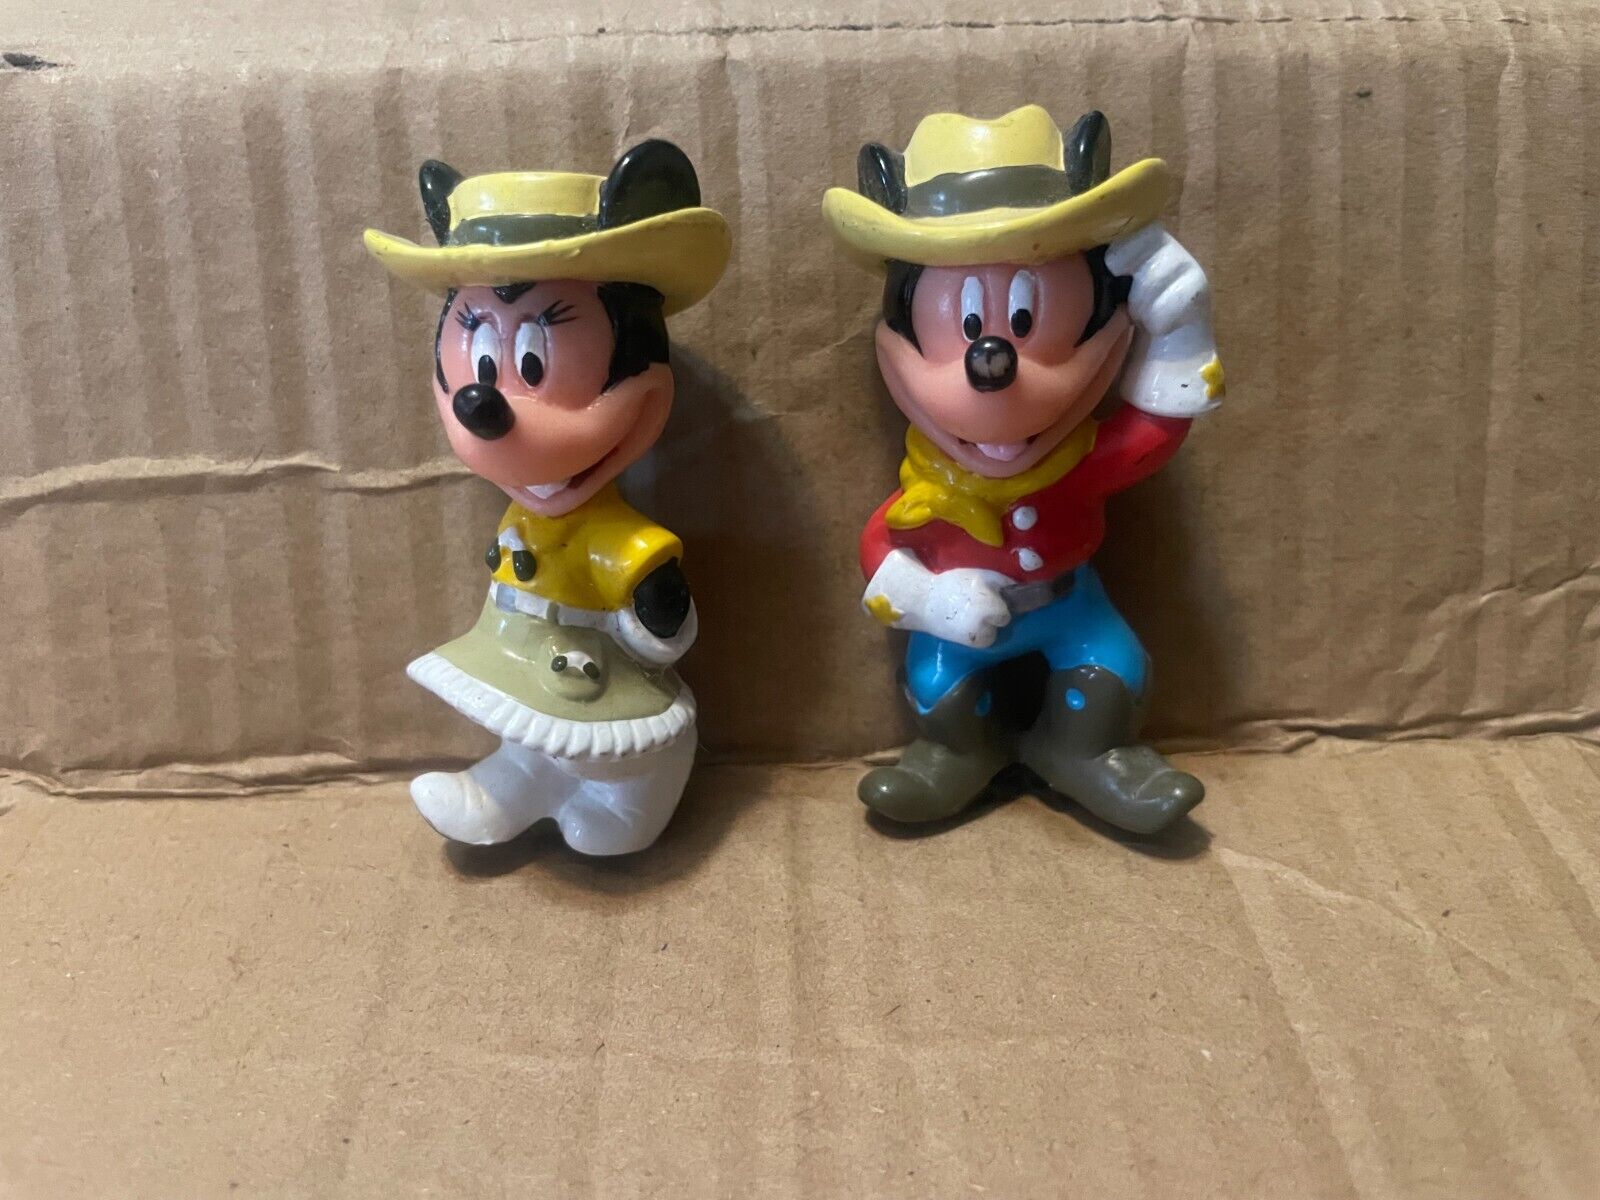 Vintage Disney Mickey and Minnie Mouse Cowboy Figurines  Excellent Condition